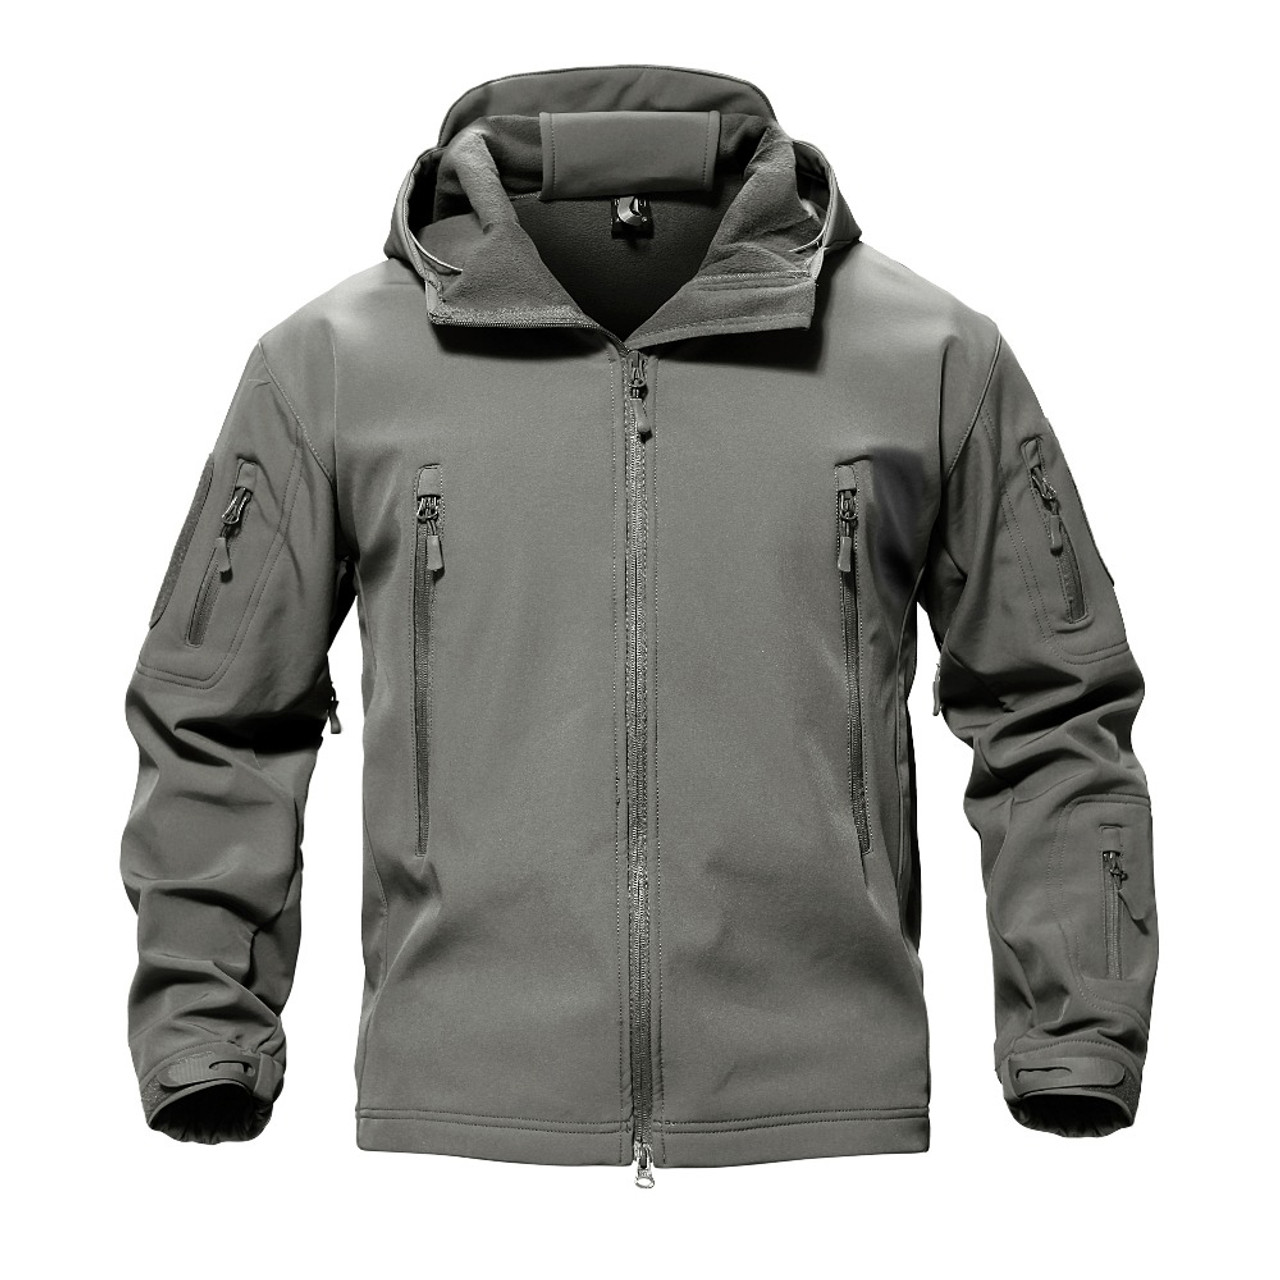 Clothing Men's Clothing Kelmon Mens Outdoor Softshell Hooded Tactical ...